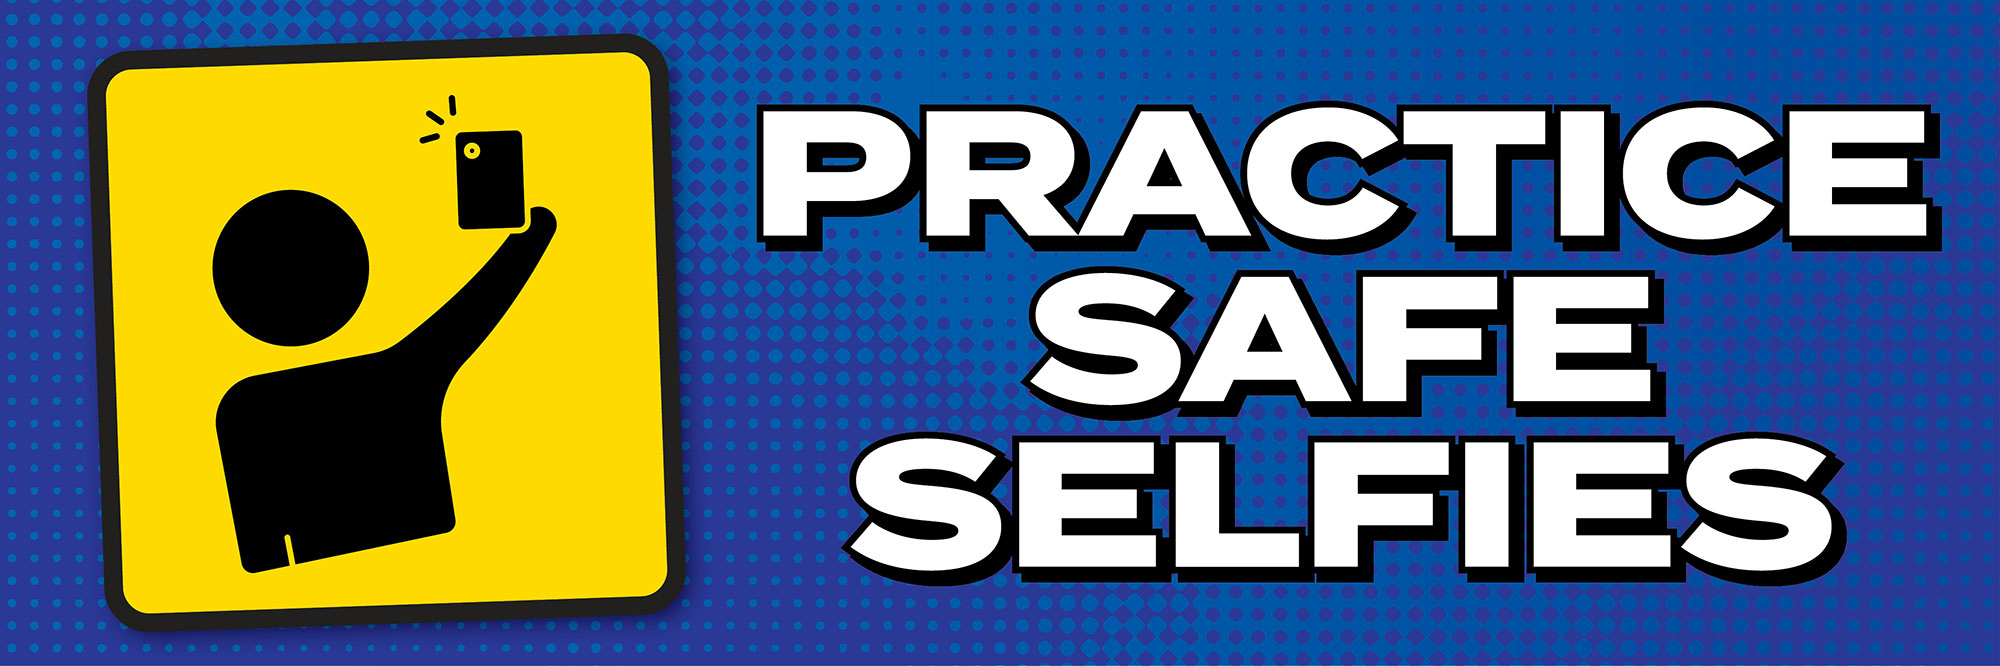 image of text that says practice safe selfies